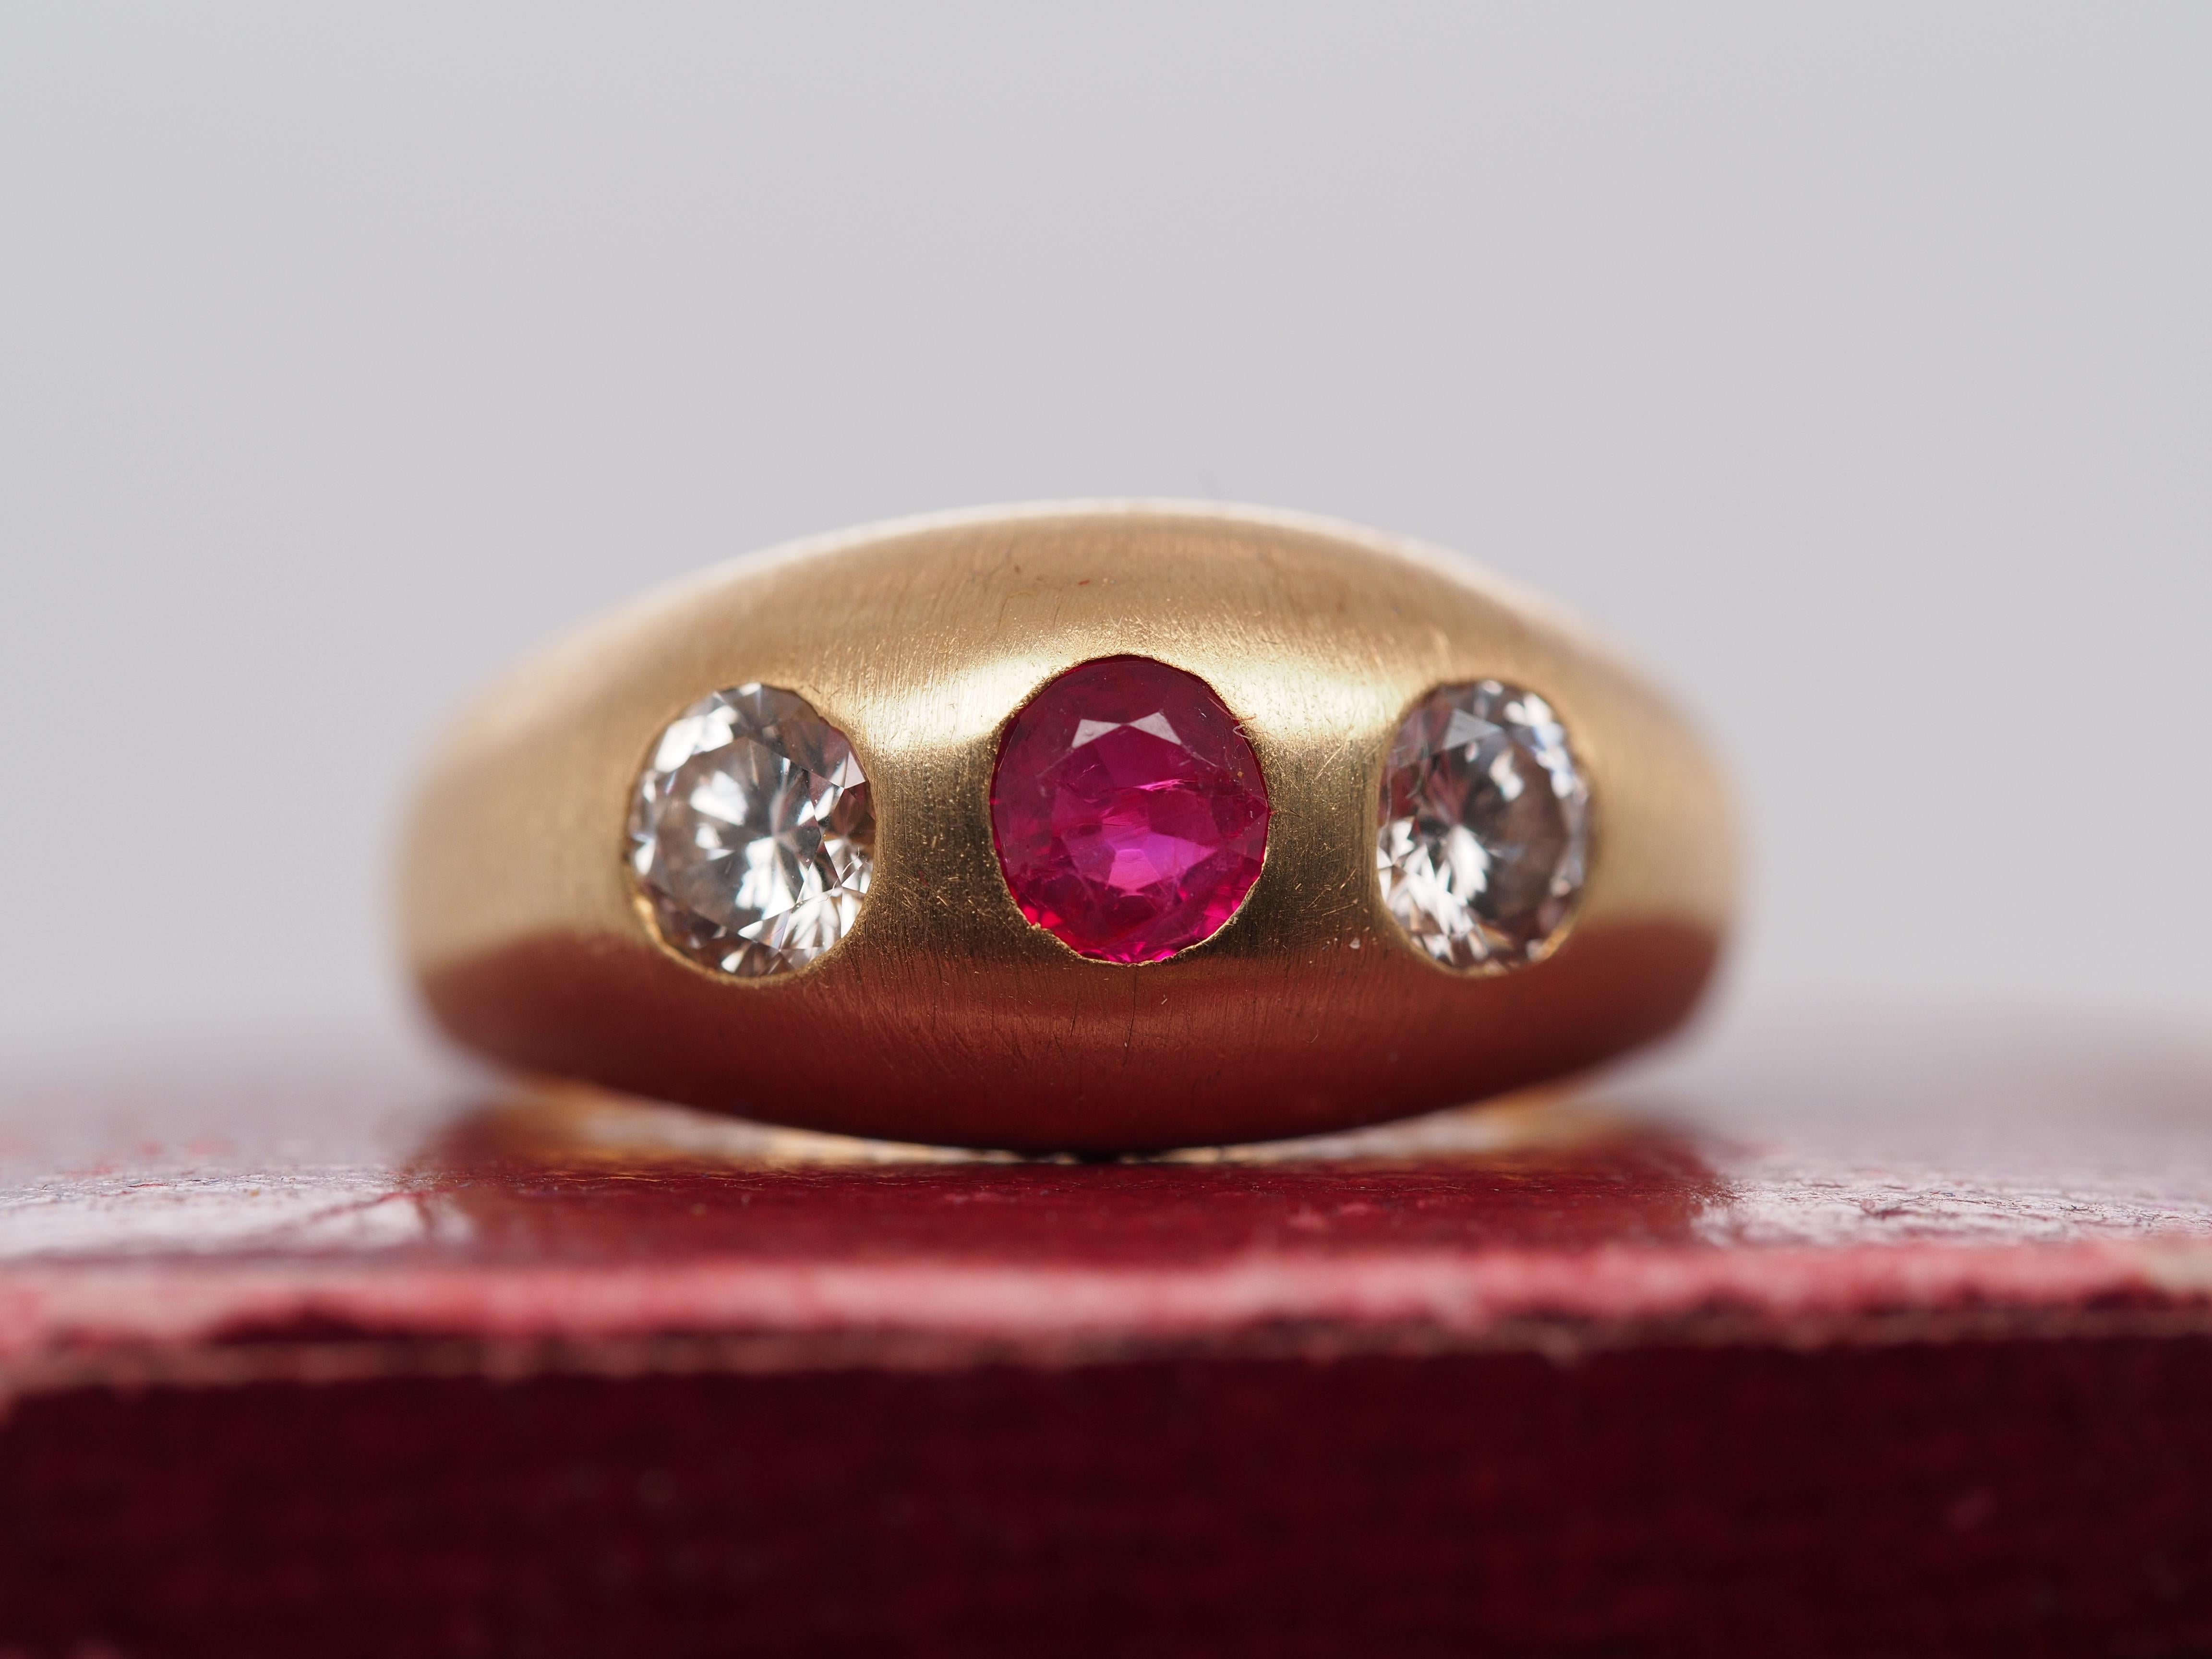 Item Details:
Ring Size: 9.75
Metal Type: 14k White Gold [Hallmarked, and Tested]
Weight: 9.6 grams
Center Ruby Details: Red, Natural, .60ct, Round
Diamond Details: .50ct each, K Color, VS Clarity, Transitional Round
Band Width: 4.5mm
Condition: